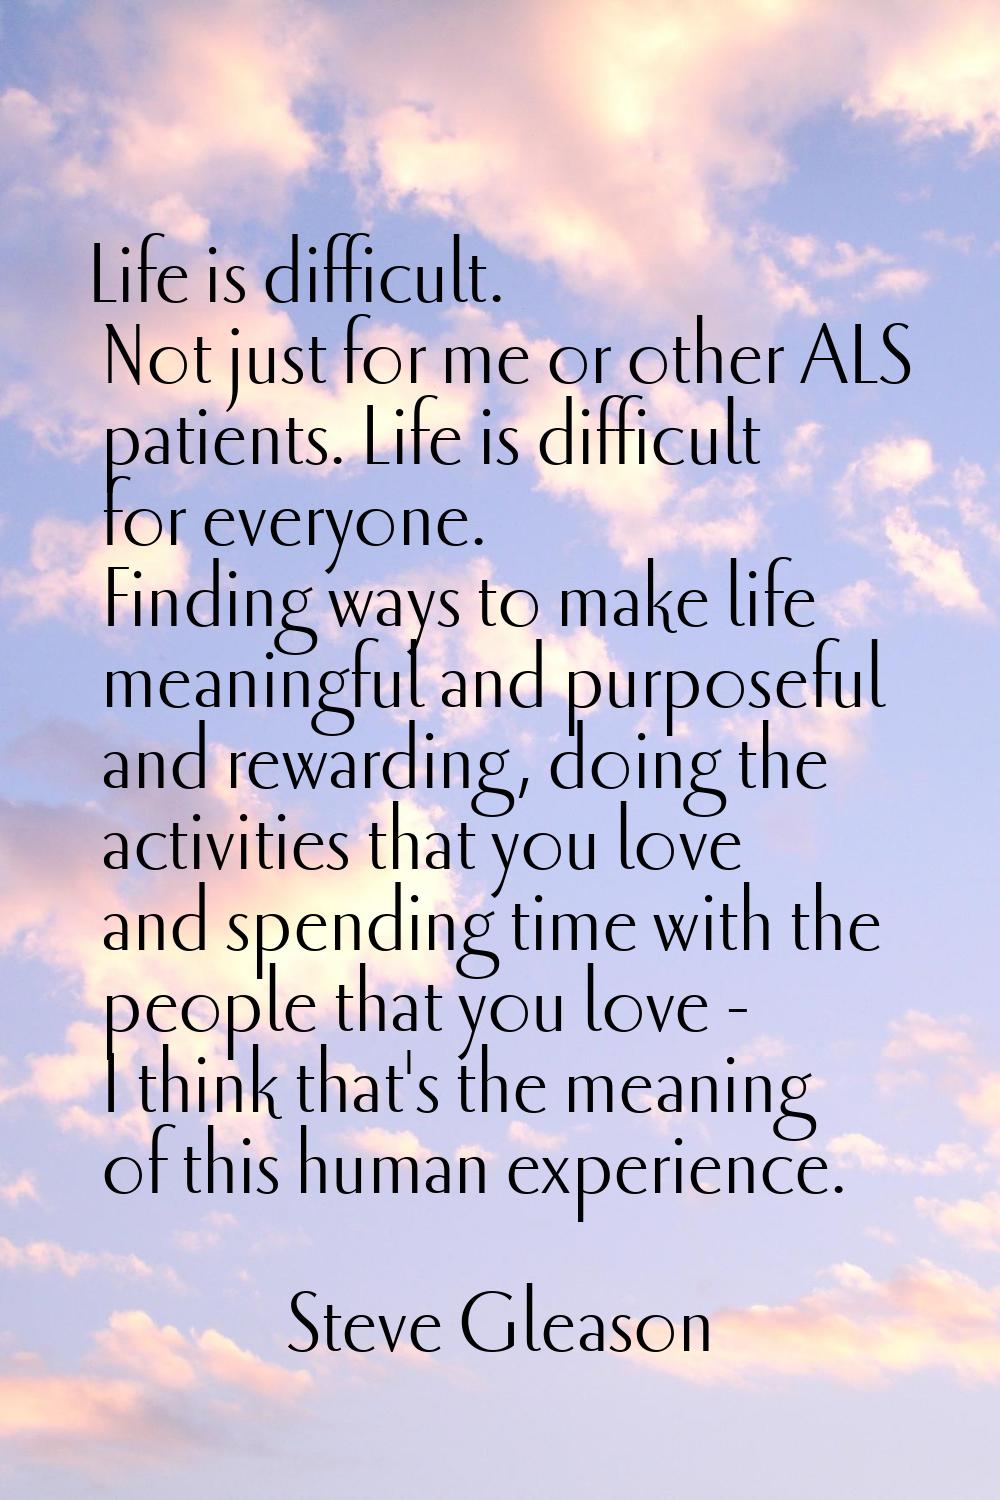 Life is difficult. Not just for me or other ALS patients. Life is difficult for everyone. Finding w